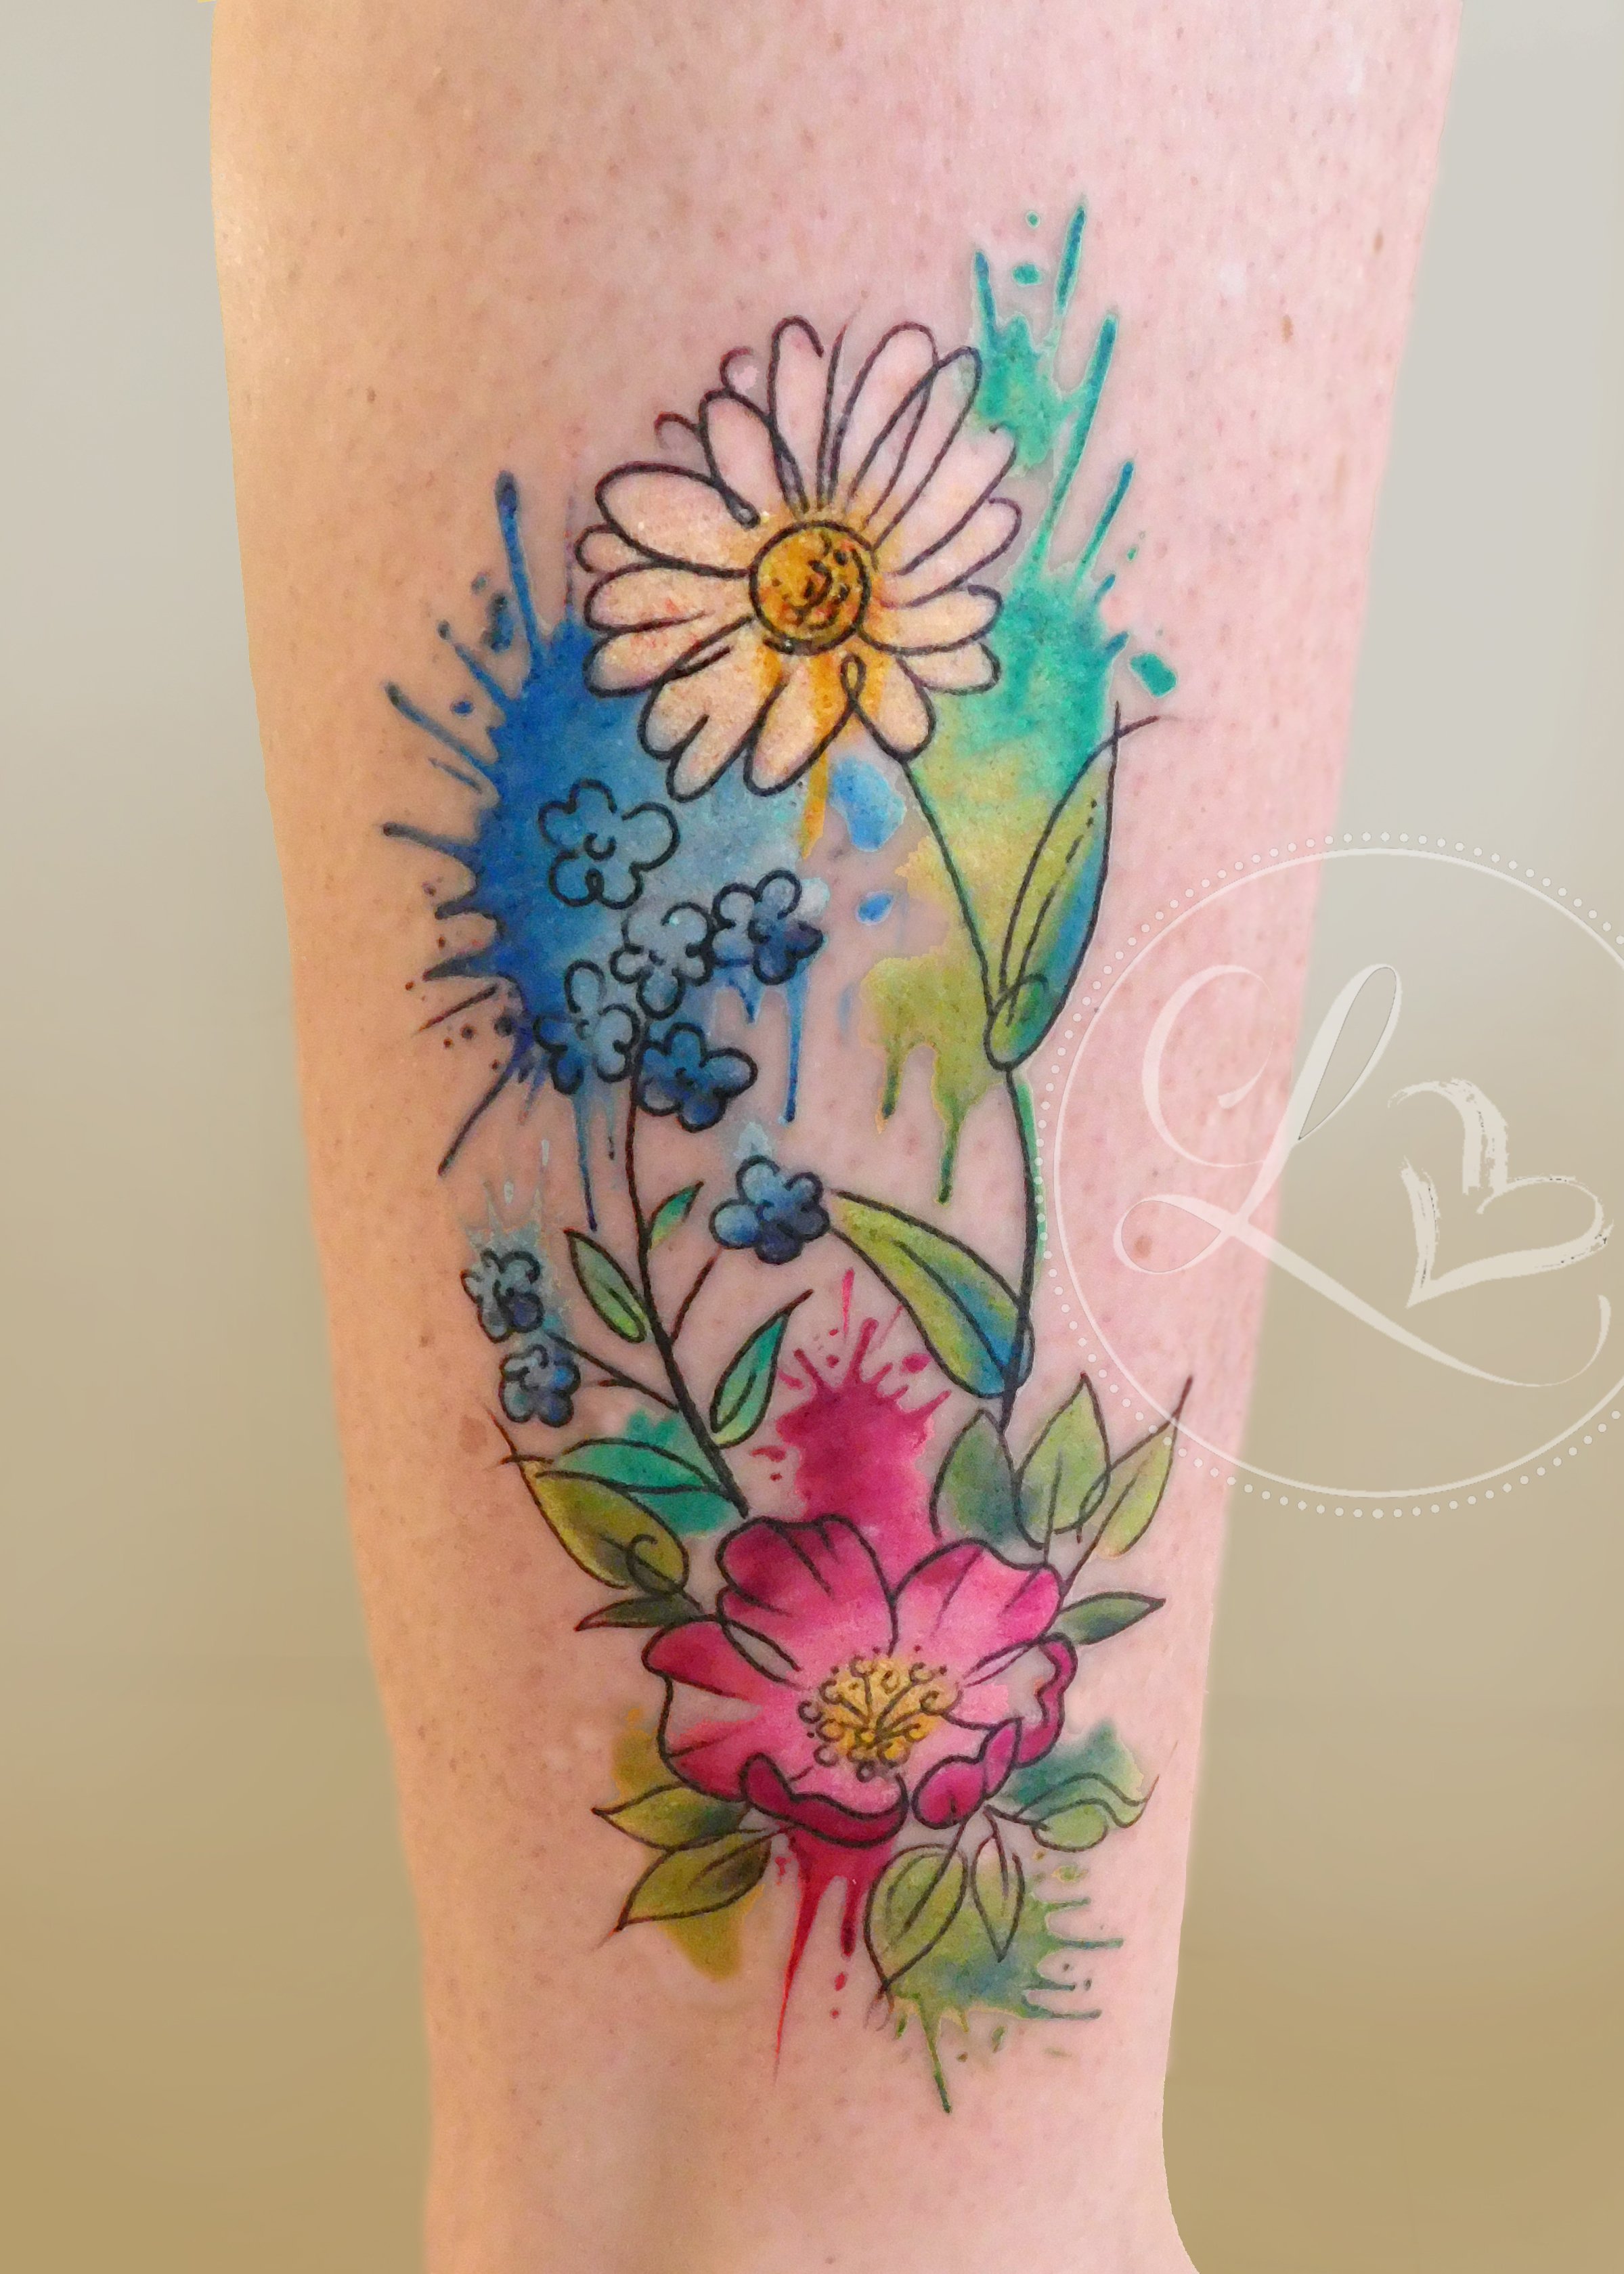 Watercolor style colorful floral bouquet on a leg featuring a daisy, forget me not, and dogwood rose